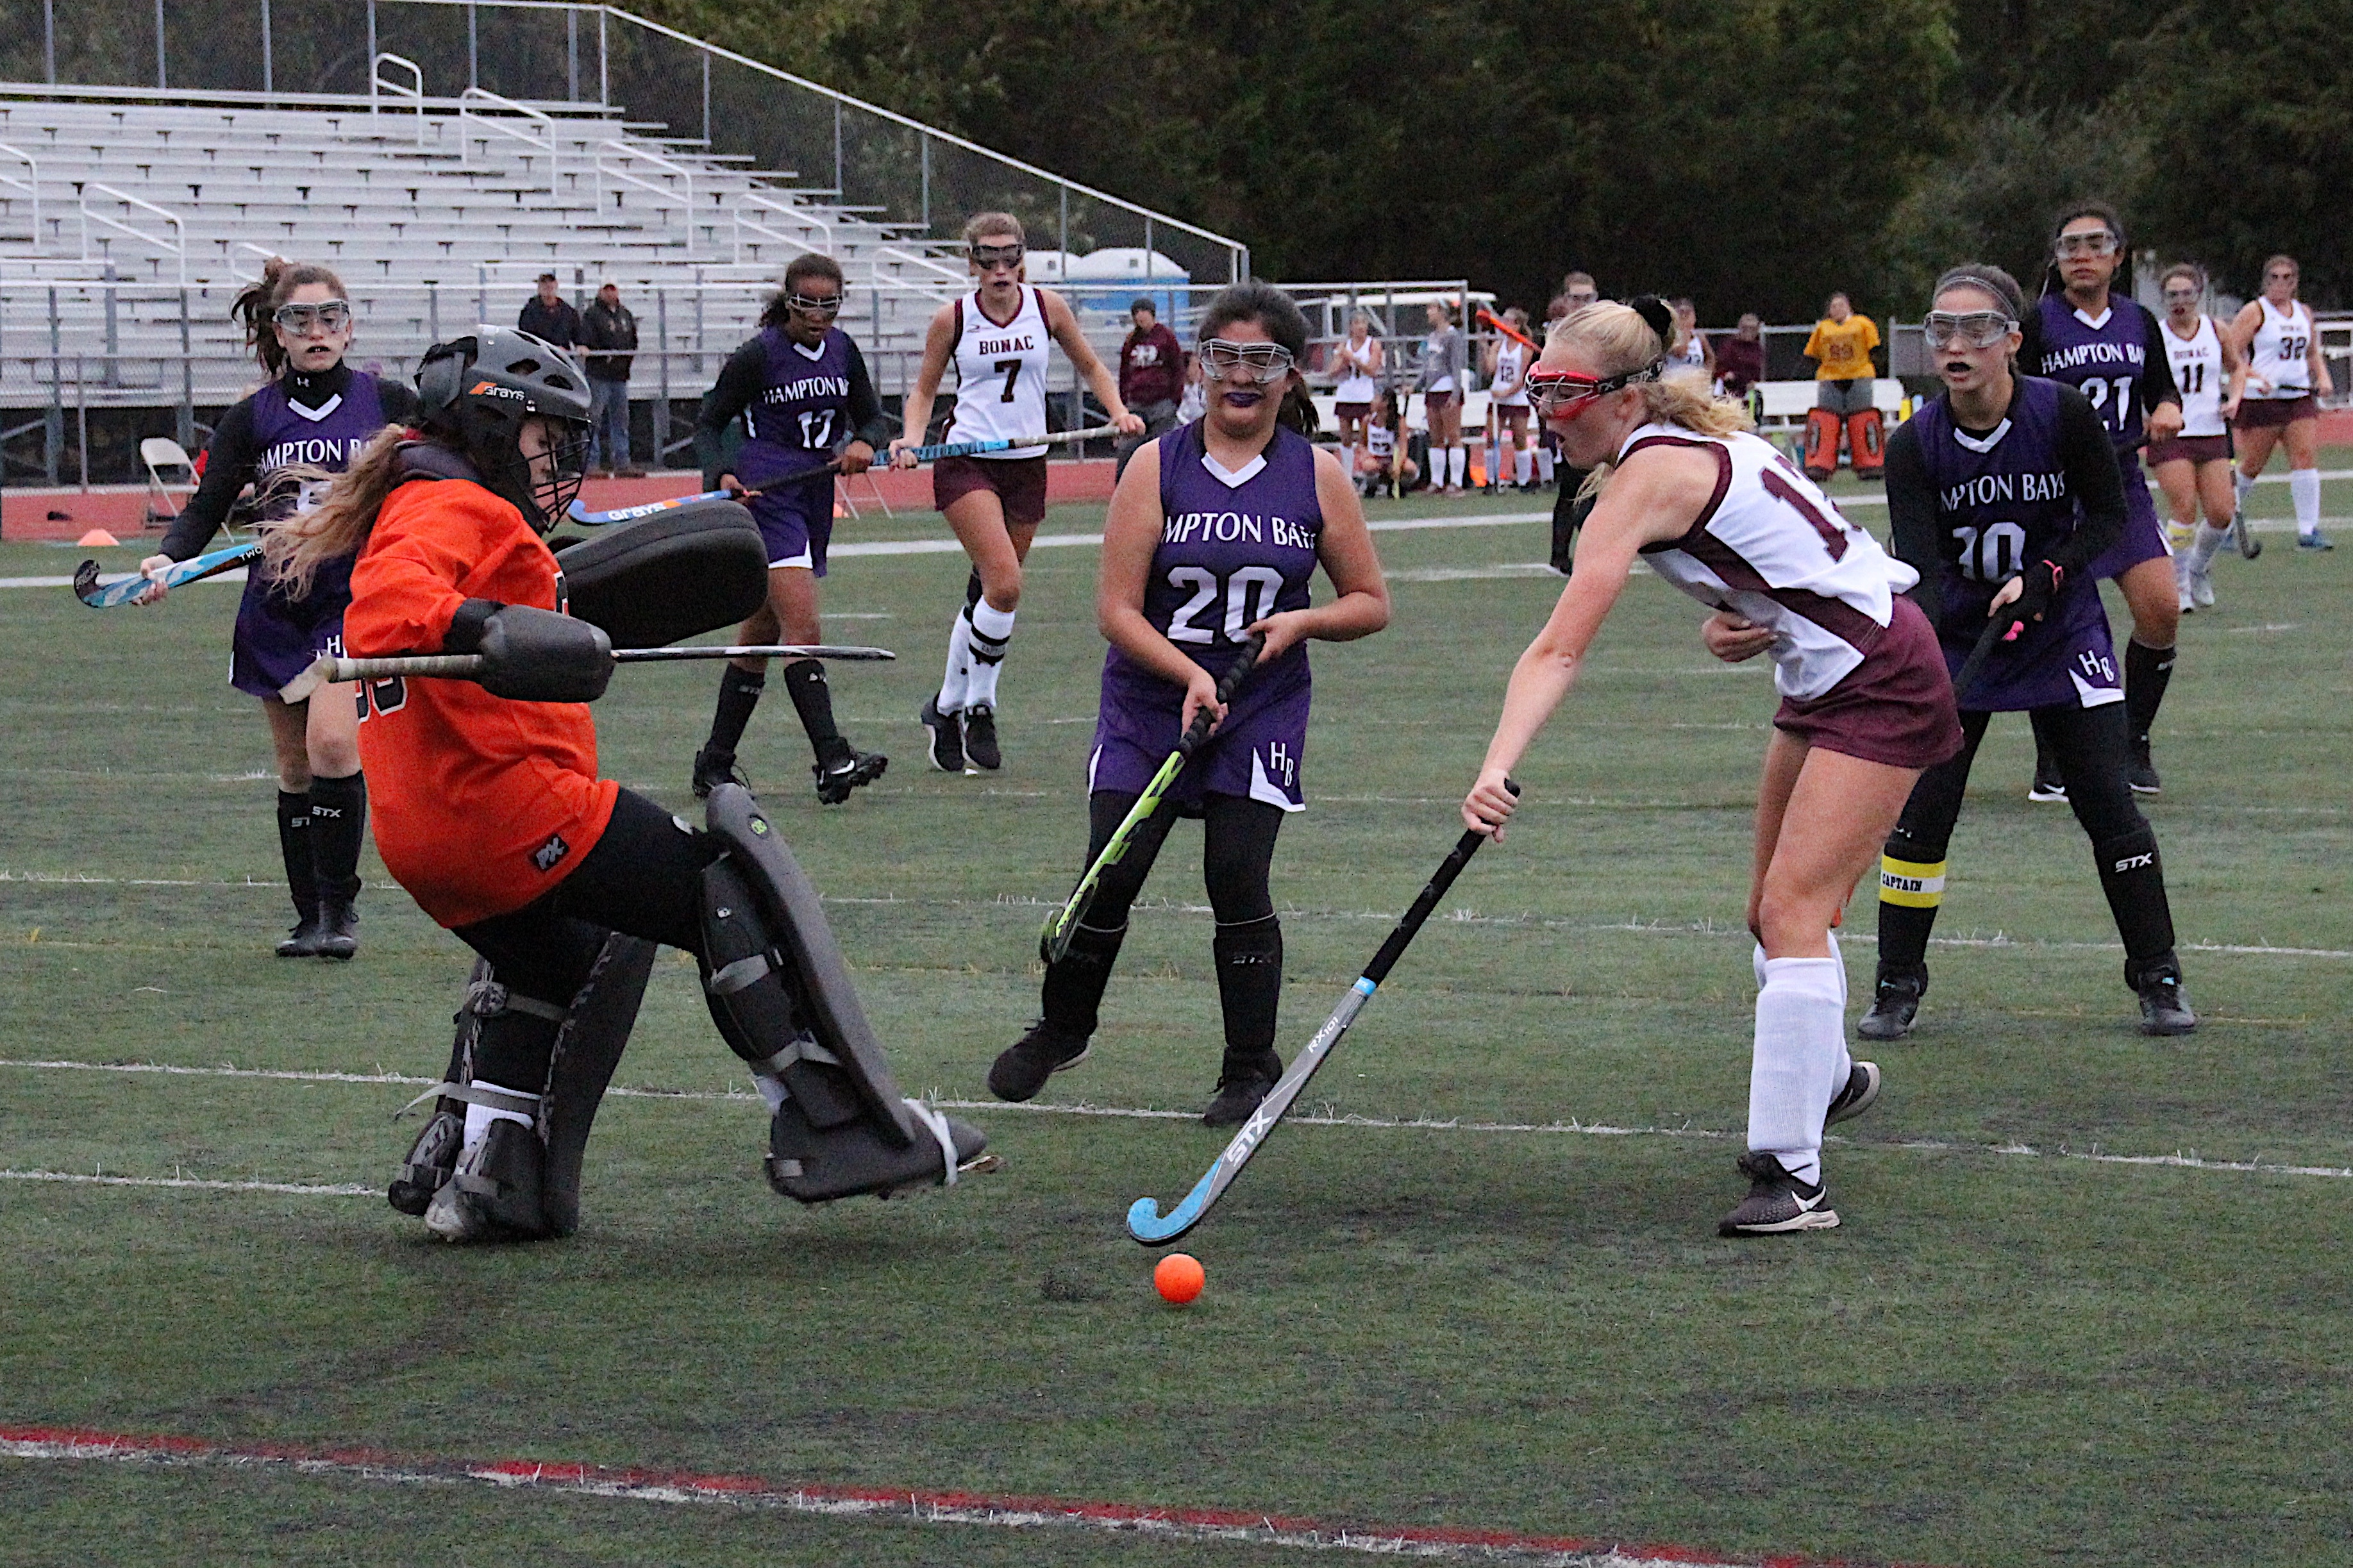 Hampton Bays goalie Abby Hoffman and defender Maria Reina comes out to stop East Hampton's Hanna Medler.